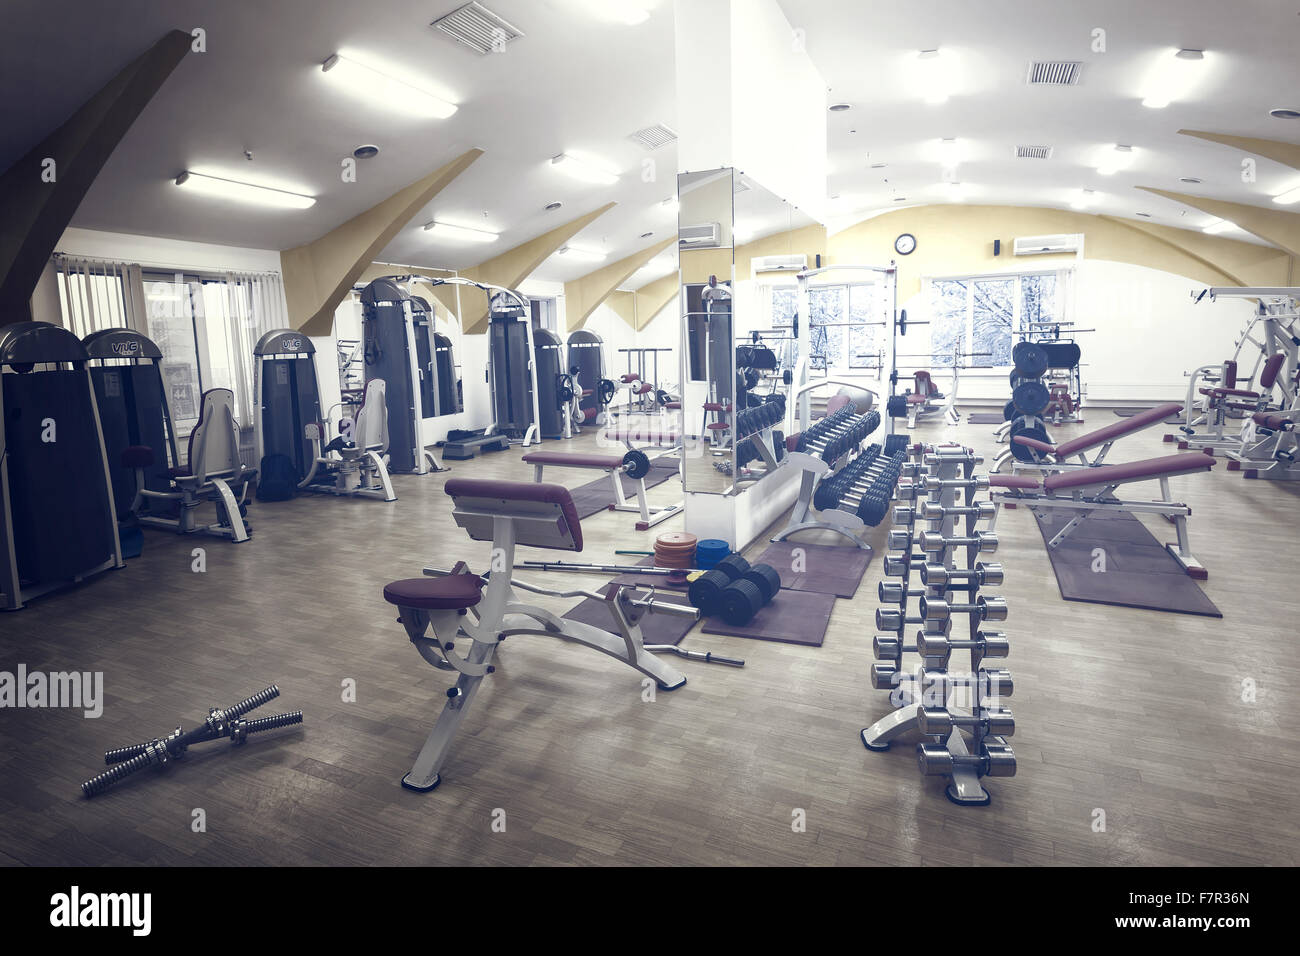 Gym with fitness equipment for training Stock Photo